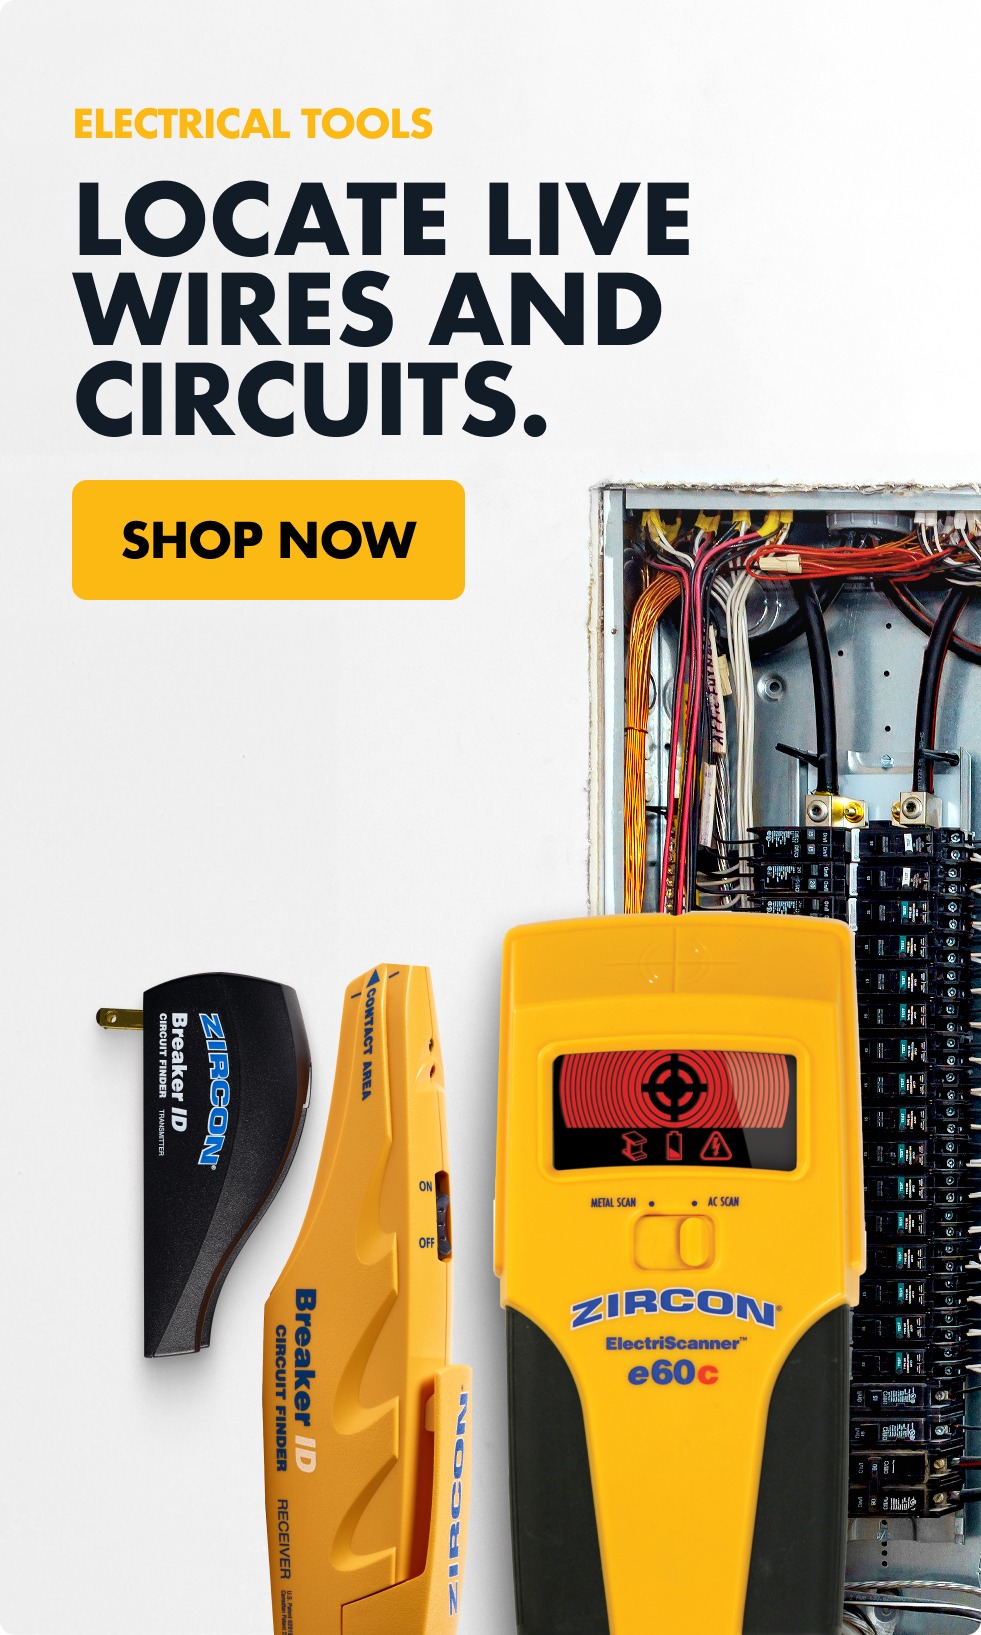 Electrical tools: locate live wires and circuits. Shop now